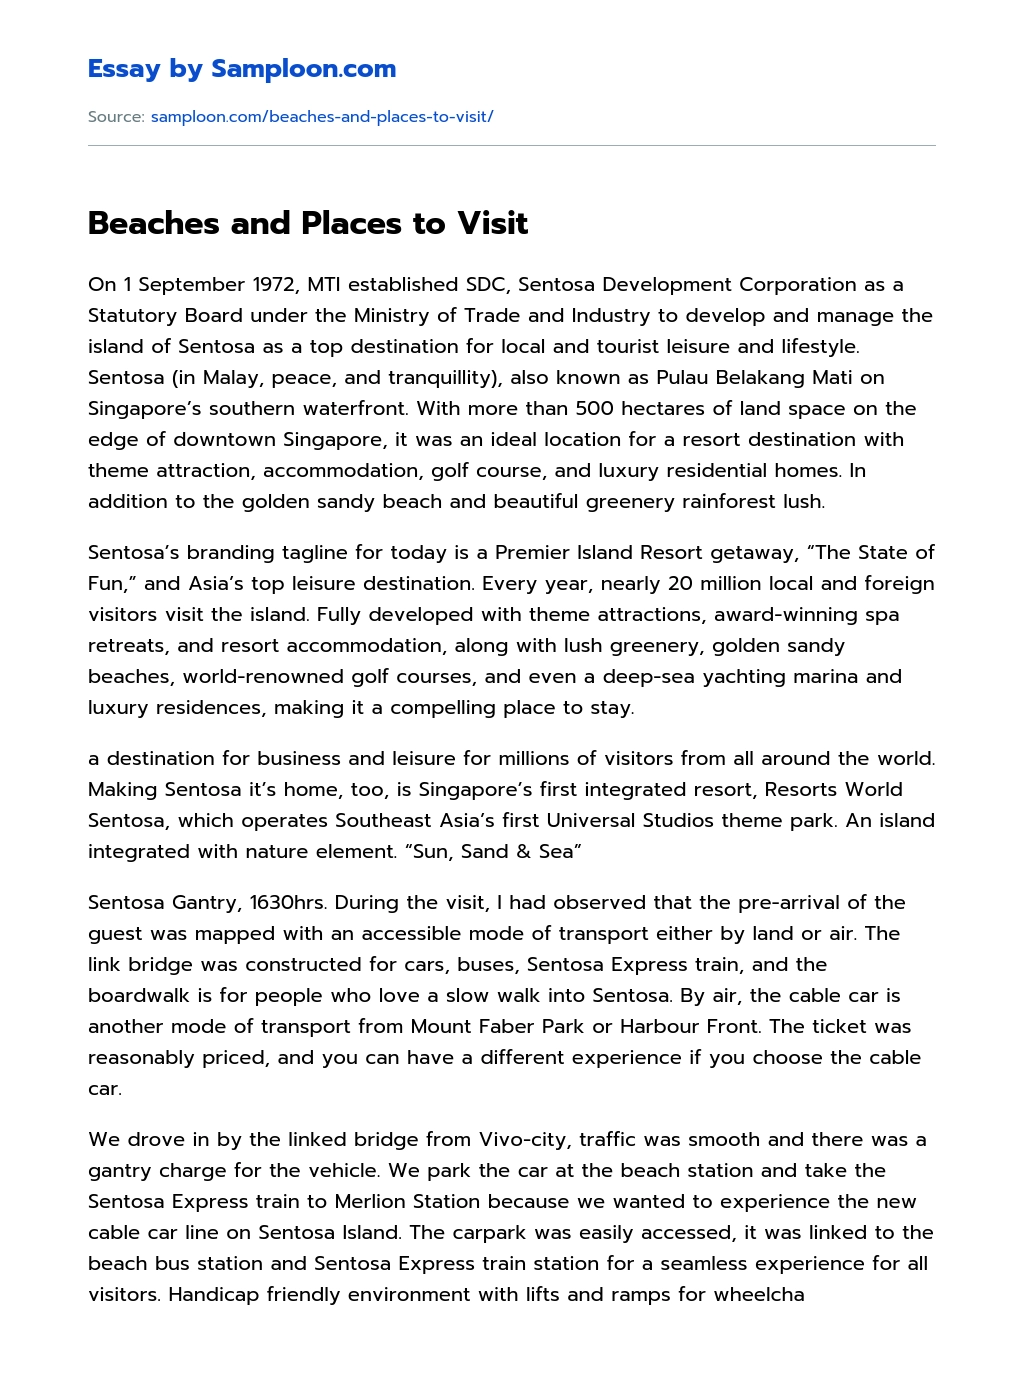 Beaches and Places to Visit essay